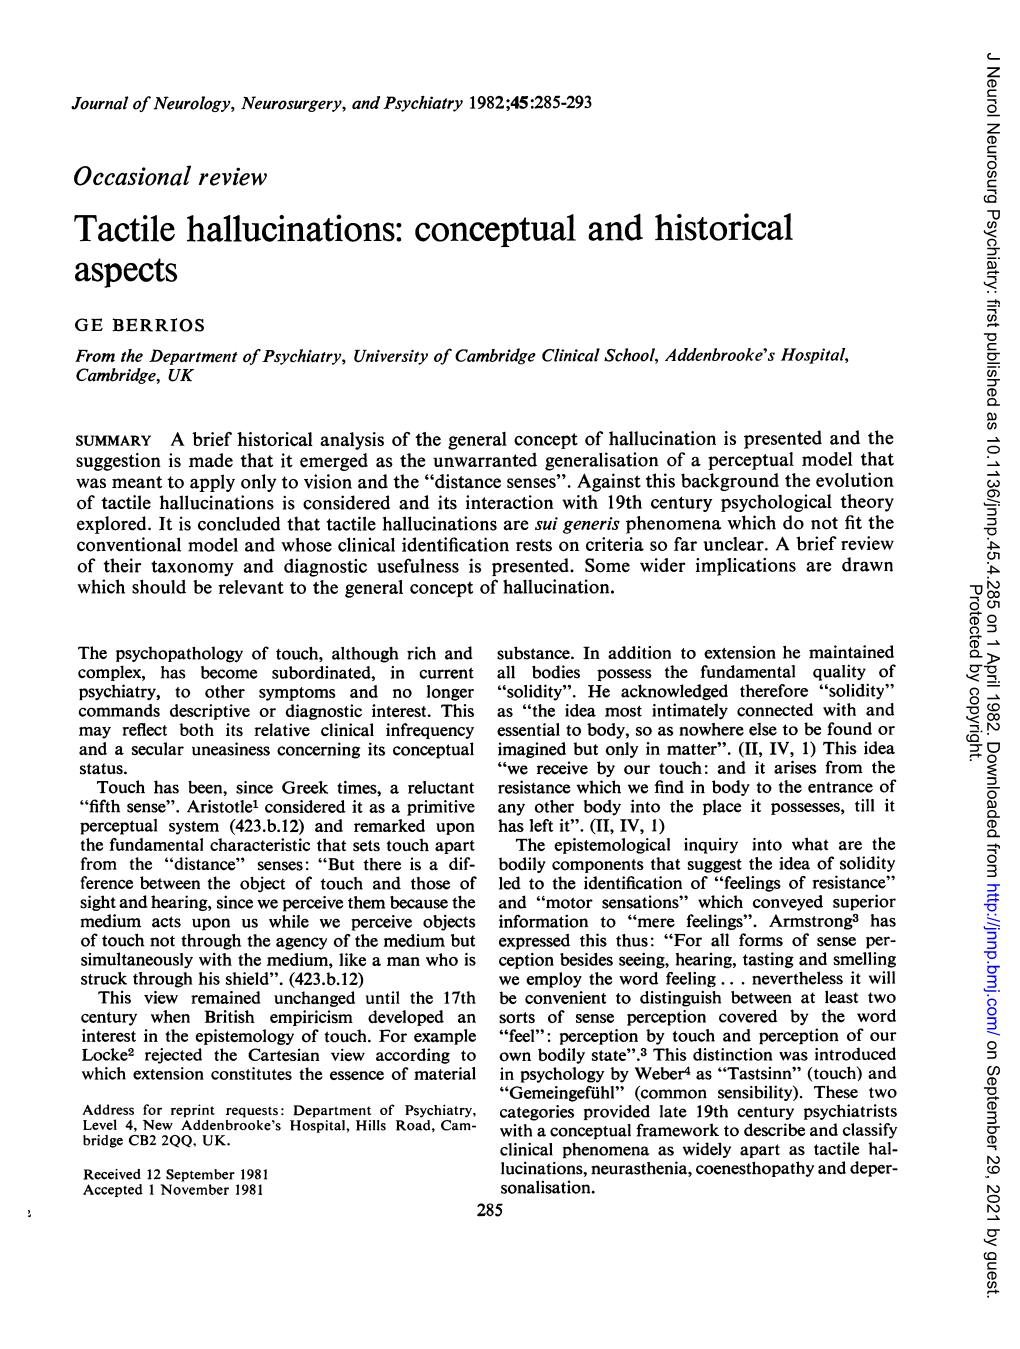 Tactile Hallucinations: Conceptual and Historical Aspects